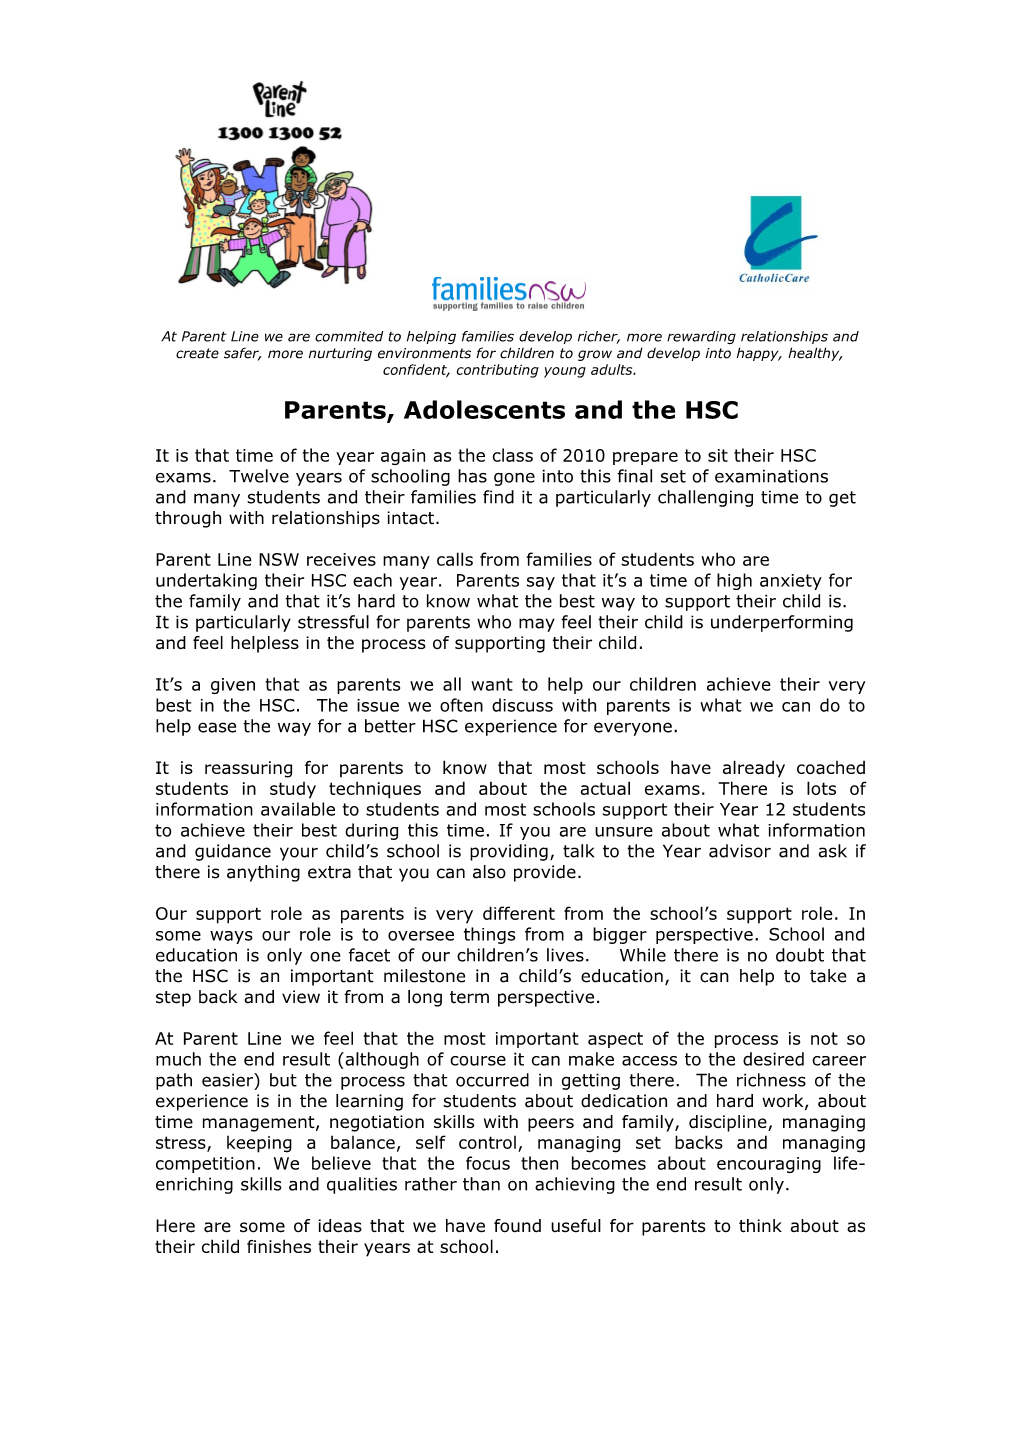 Parents, Adolescents and the HSC